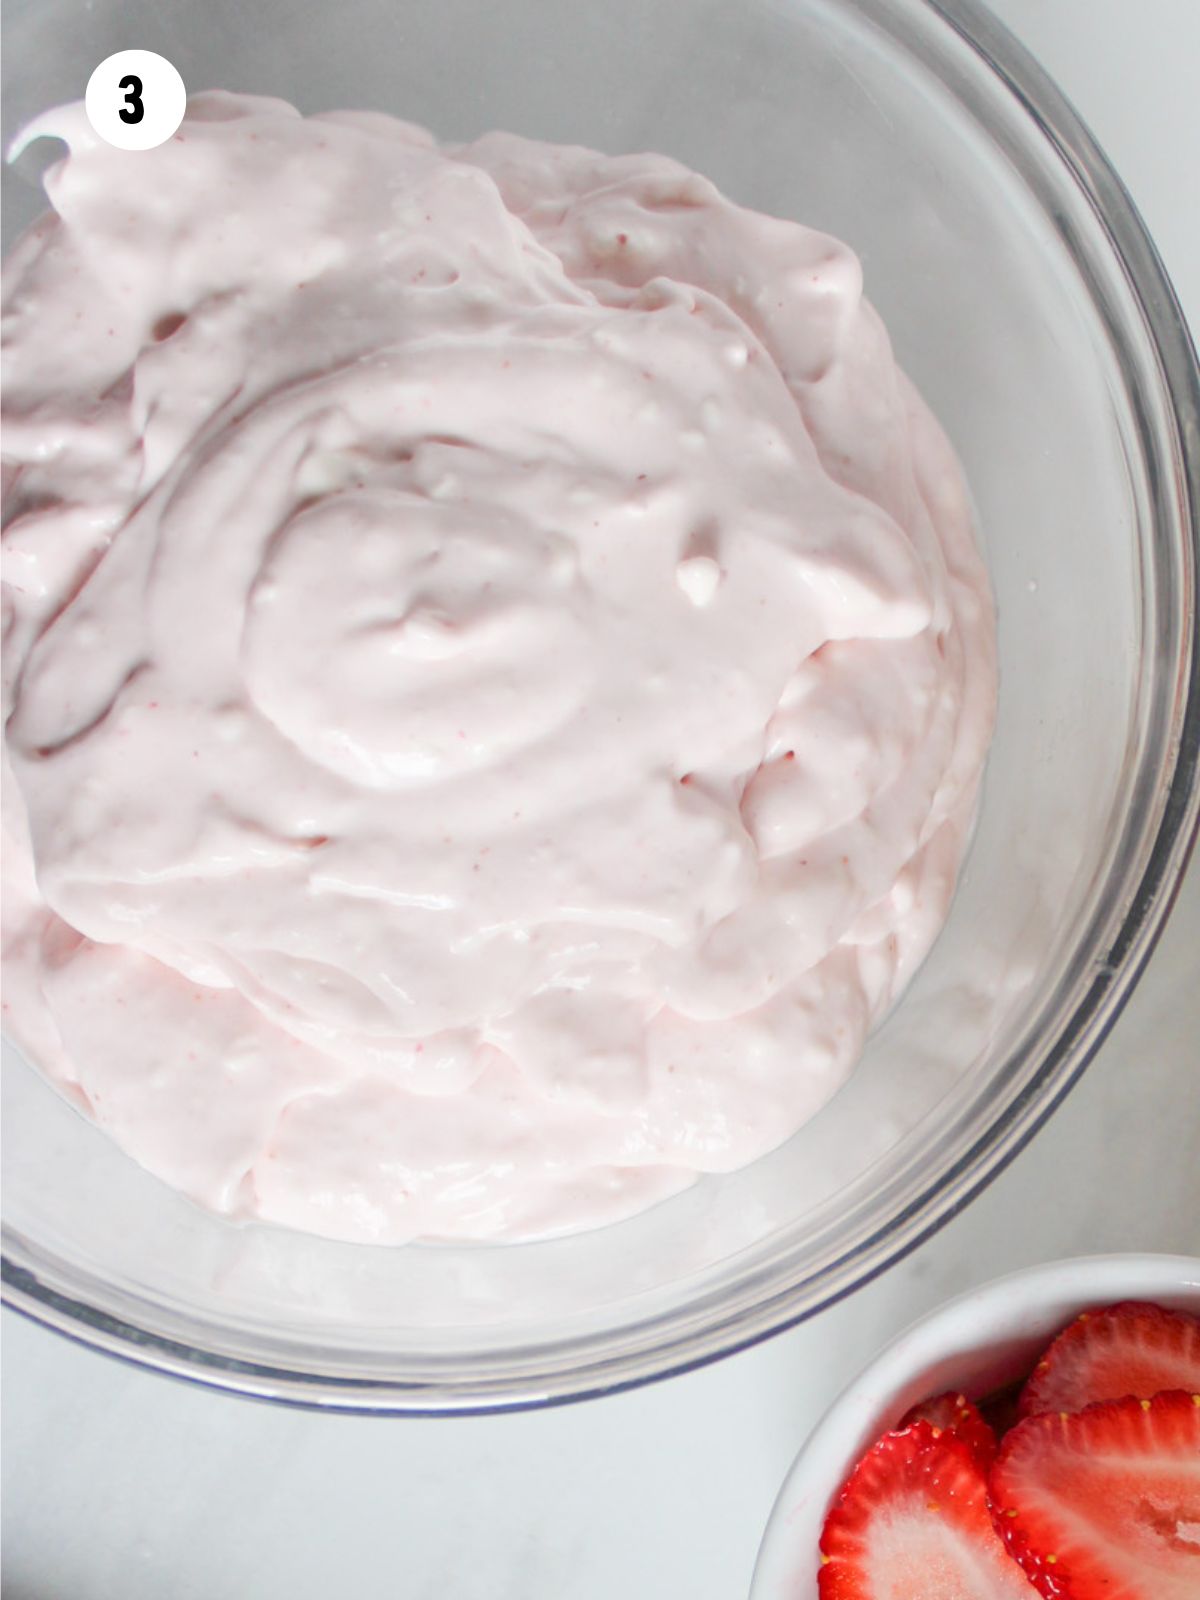 strawberry cream cheese in a bowl.